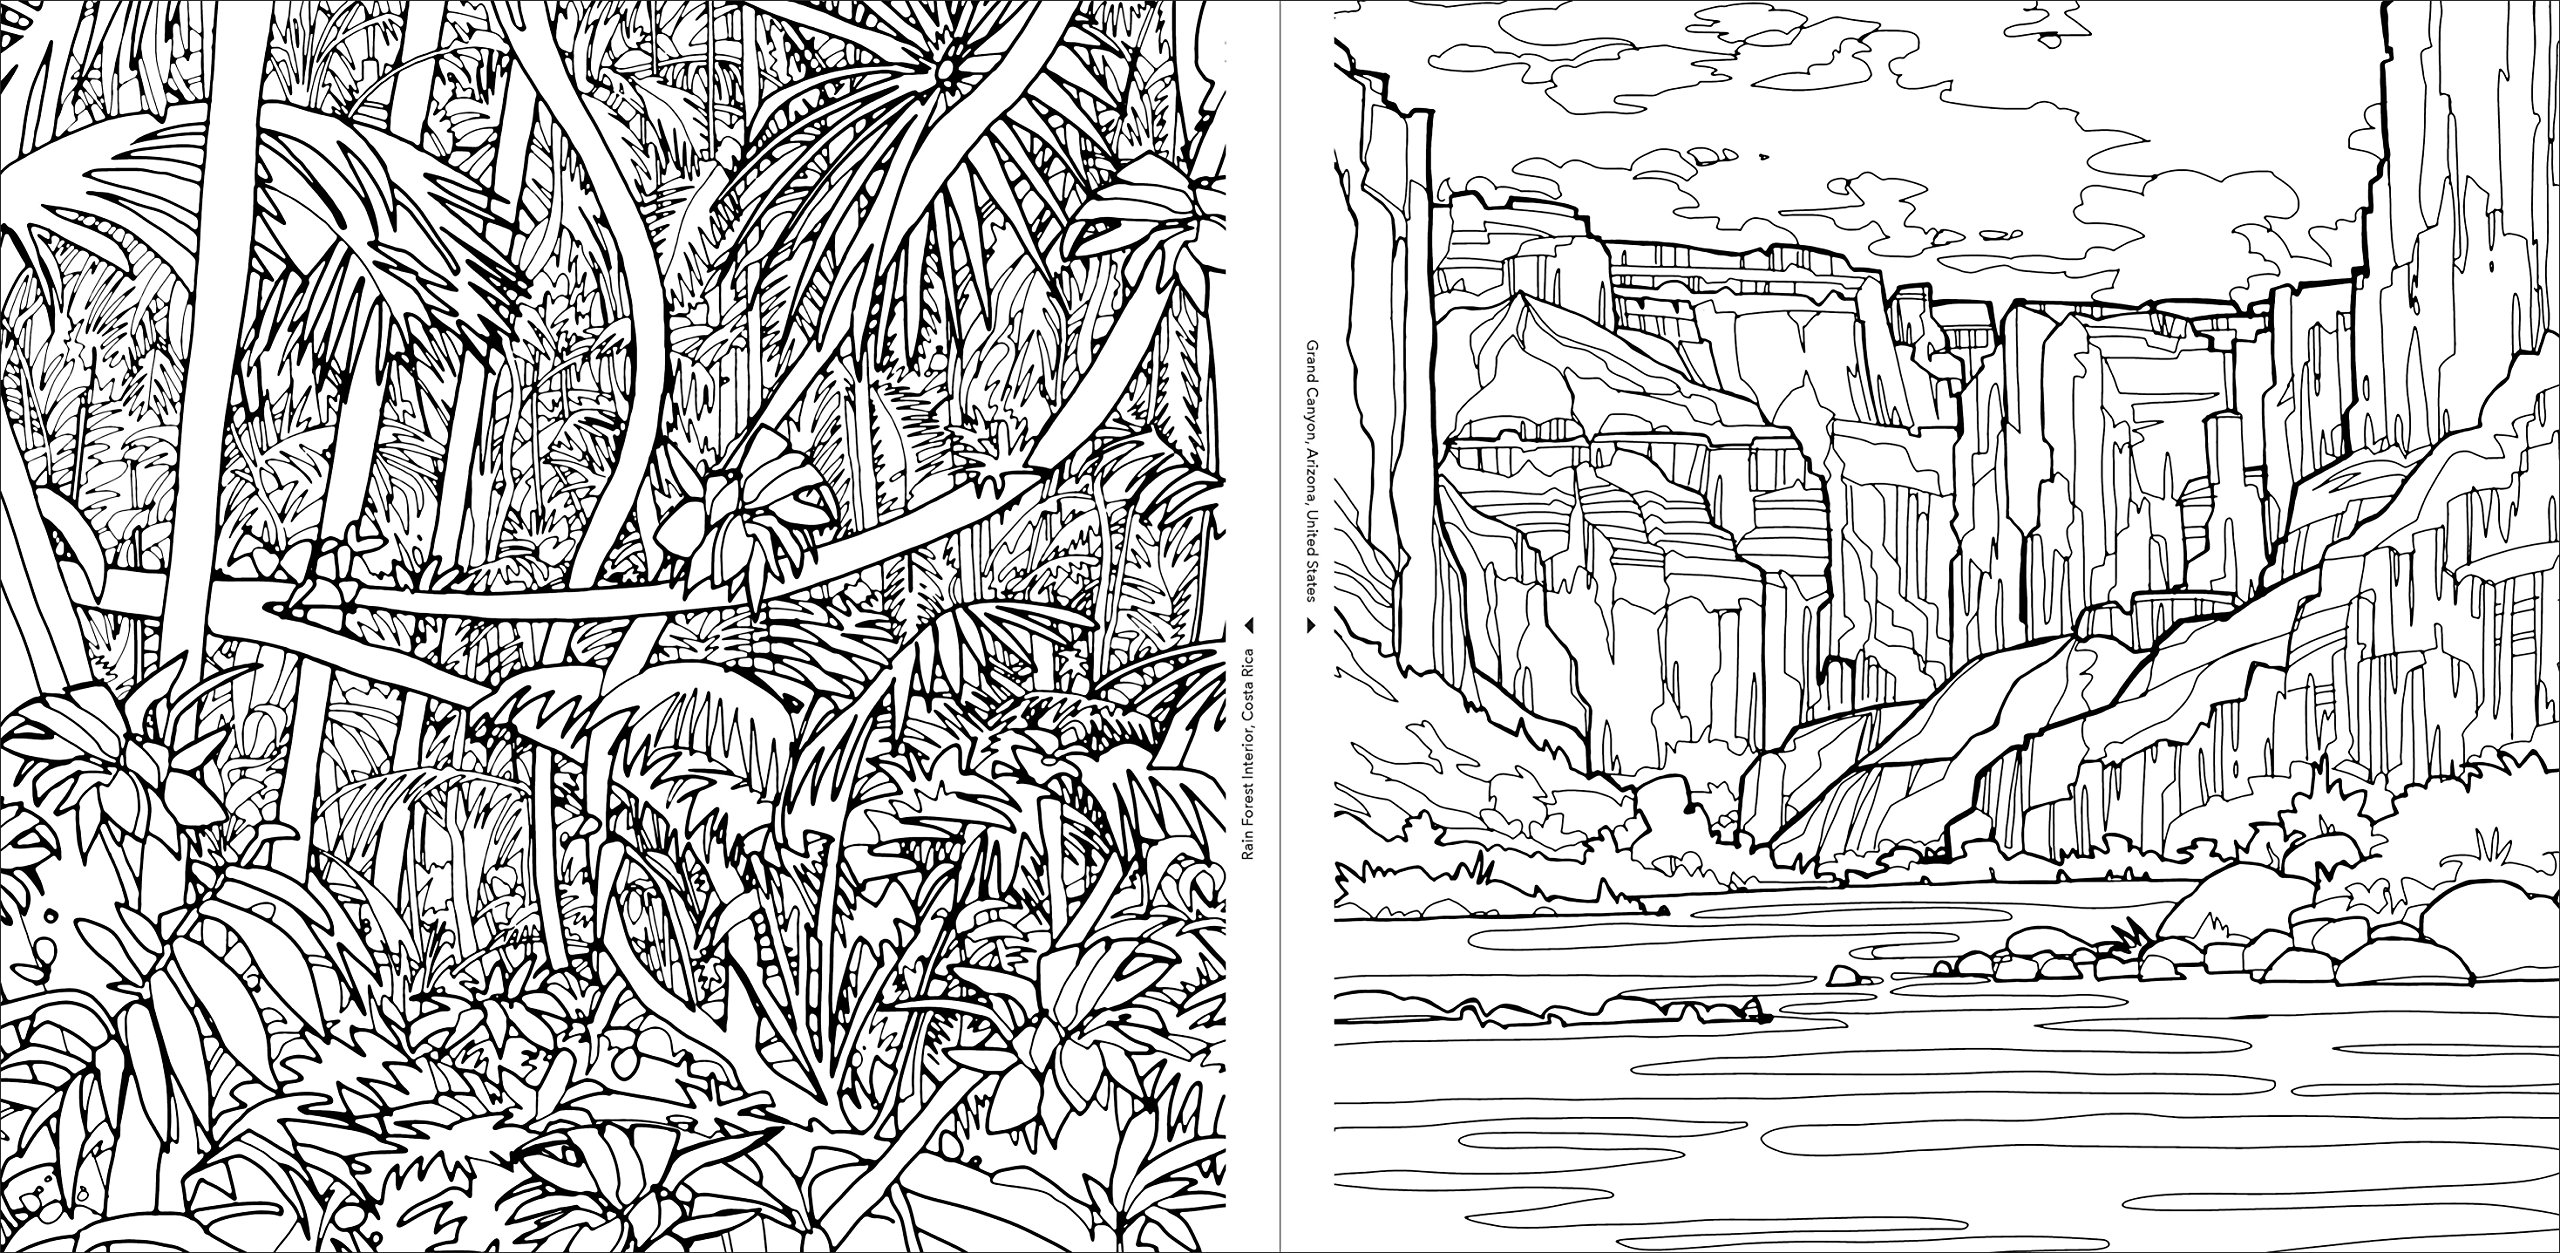 Fantastic Coloring: A Coloring Book of Amazing Places, Creatures, and Collections [Book]